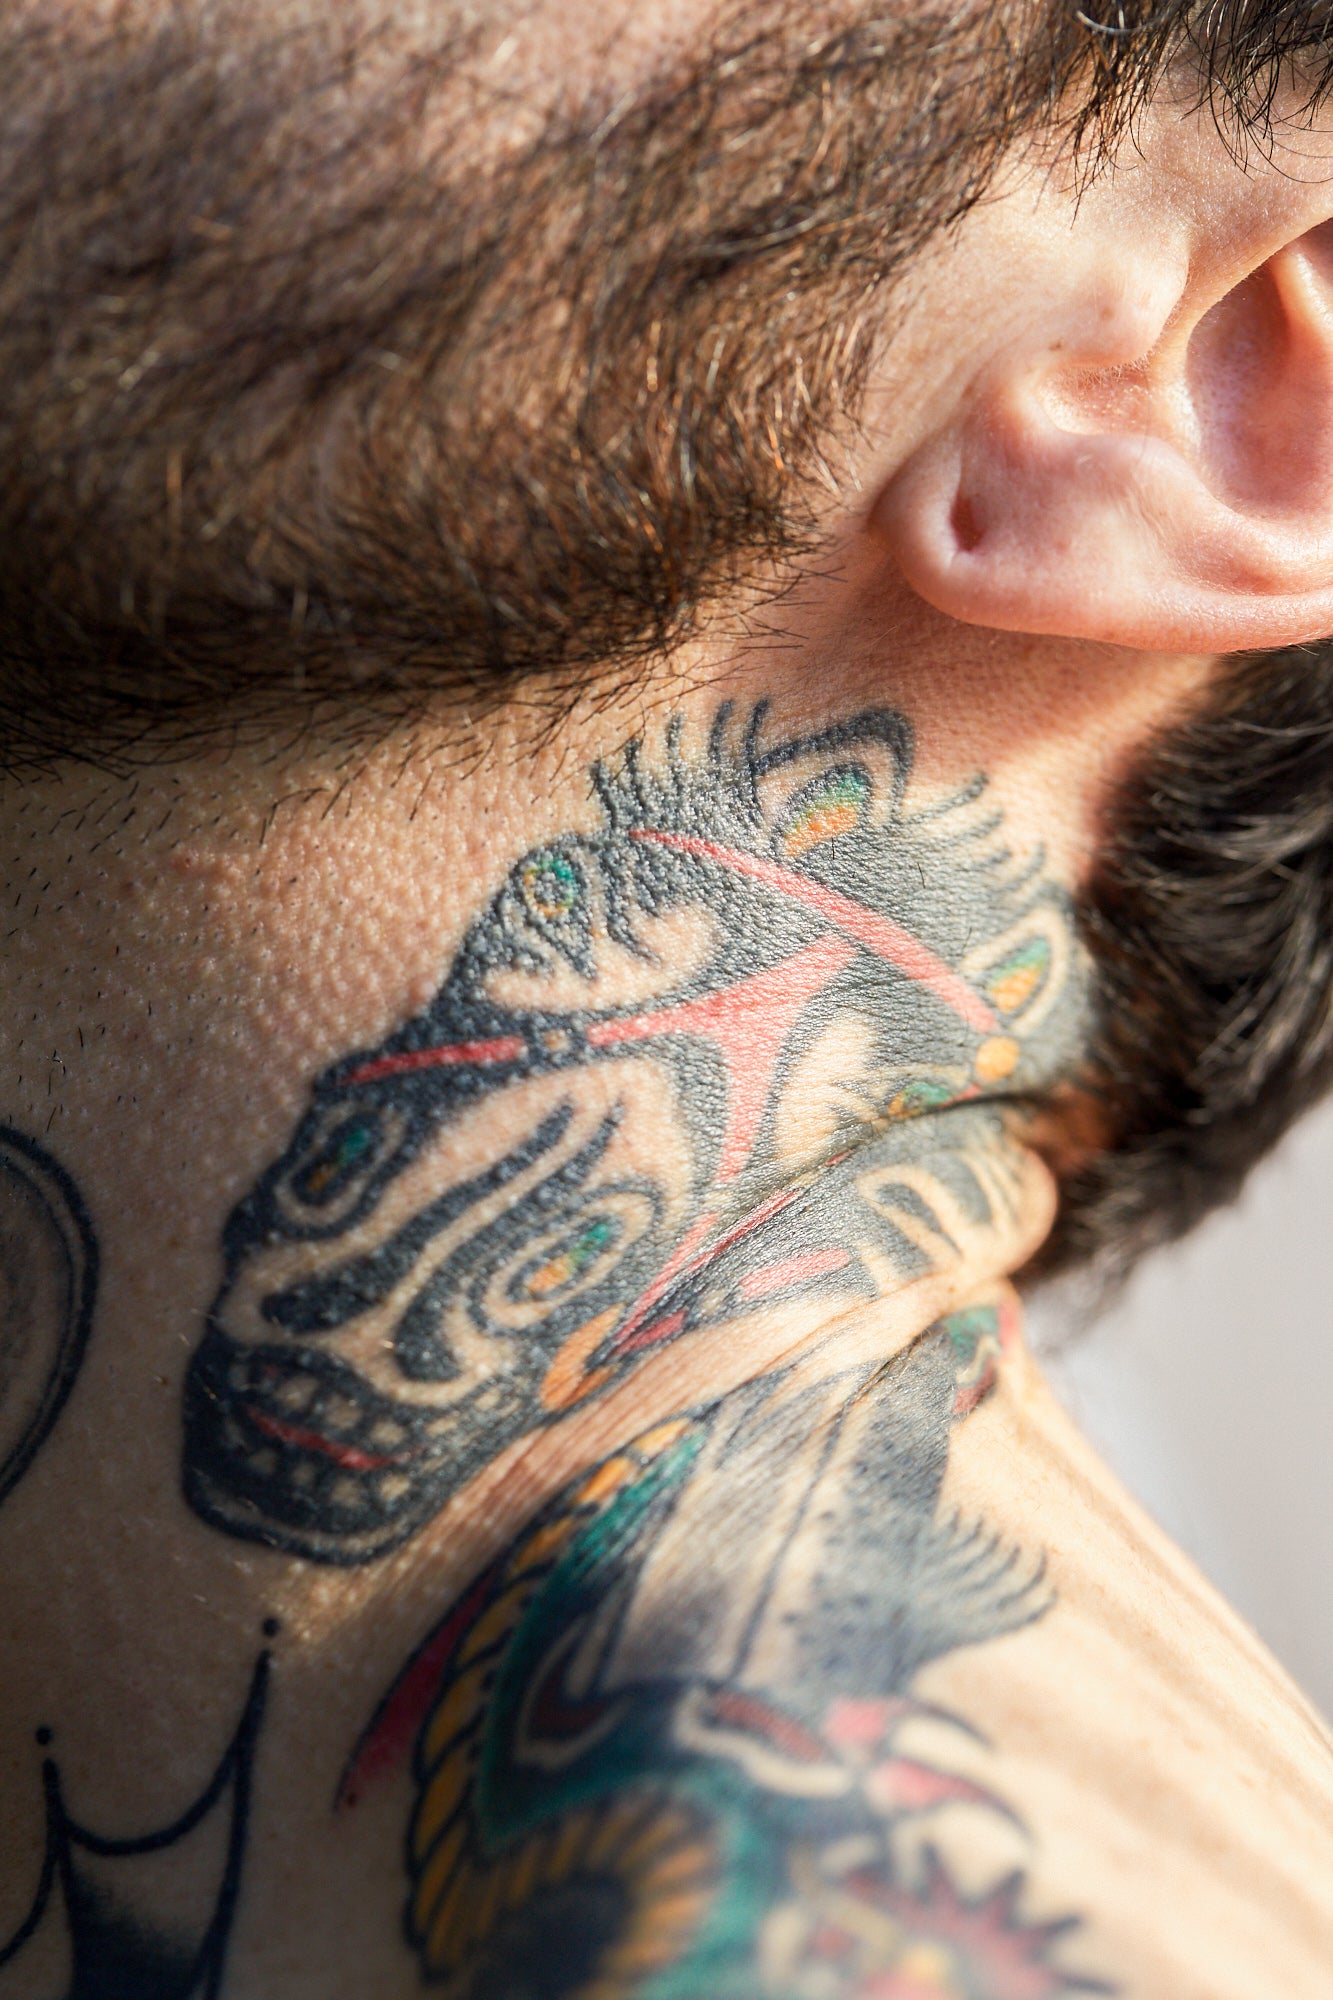 Bad Reaction From a New Tattoo Heres What to Do  Consumer Health News   HealthDay